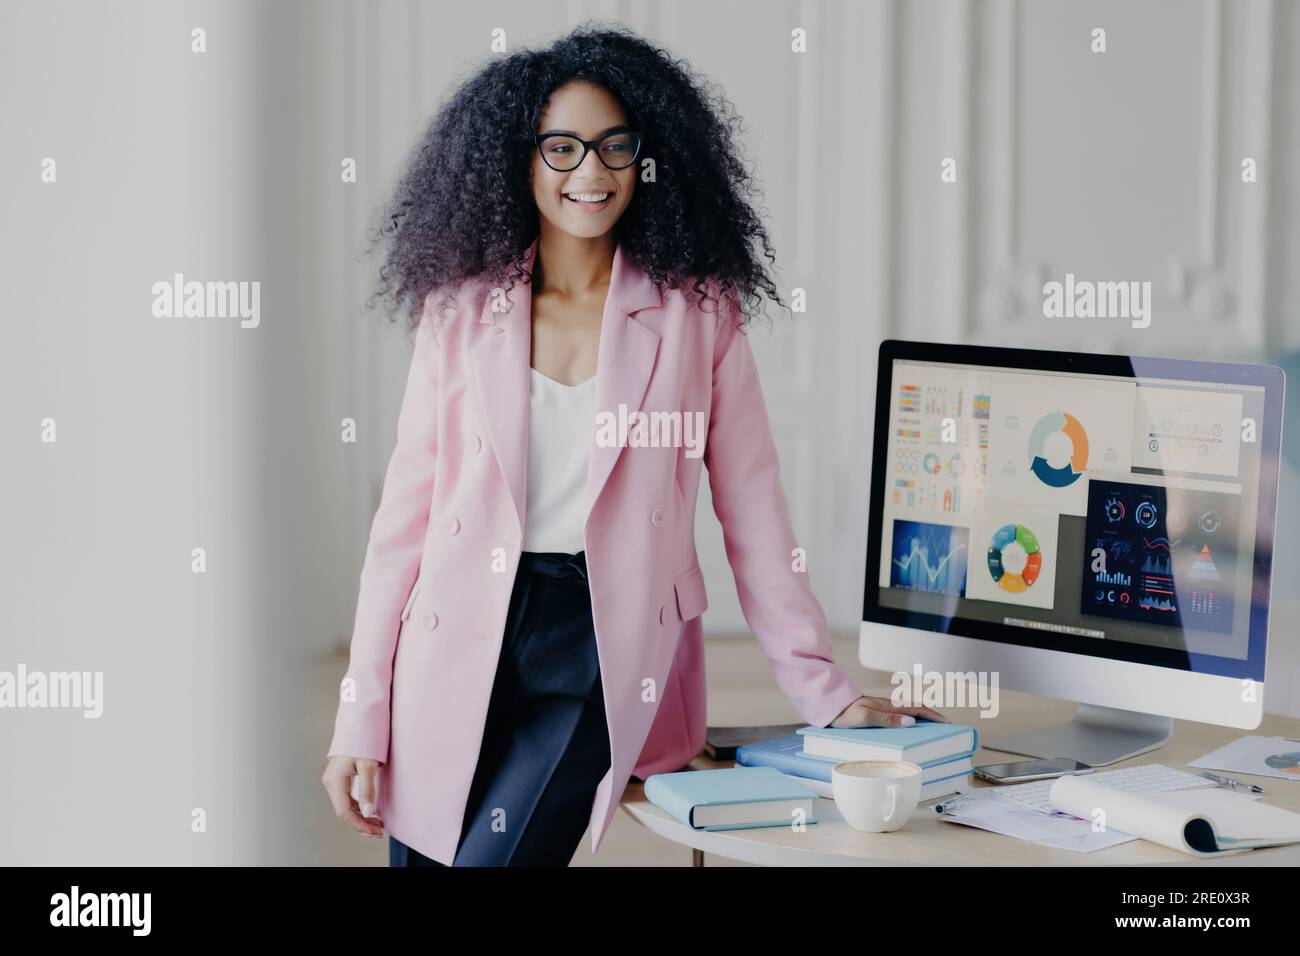 Cheerful African American woman, curly hair, formal outfit, prepares presentation in front of auditorium with computer graphics. Stock Photo